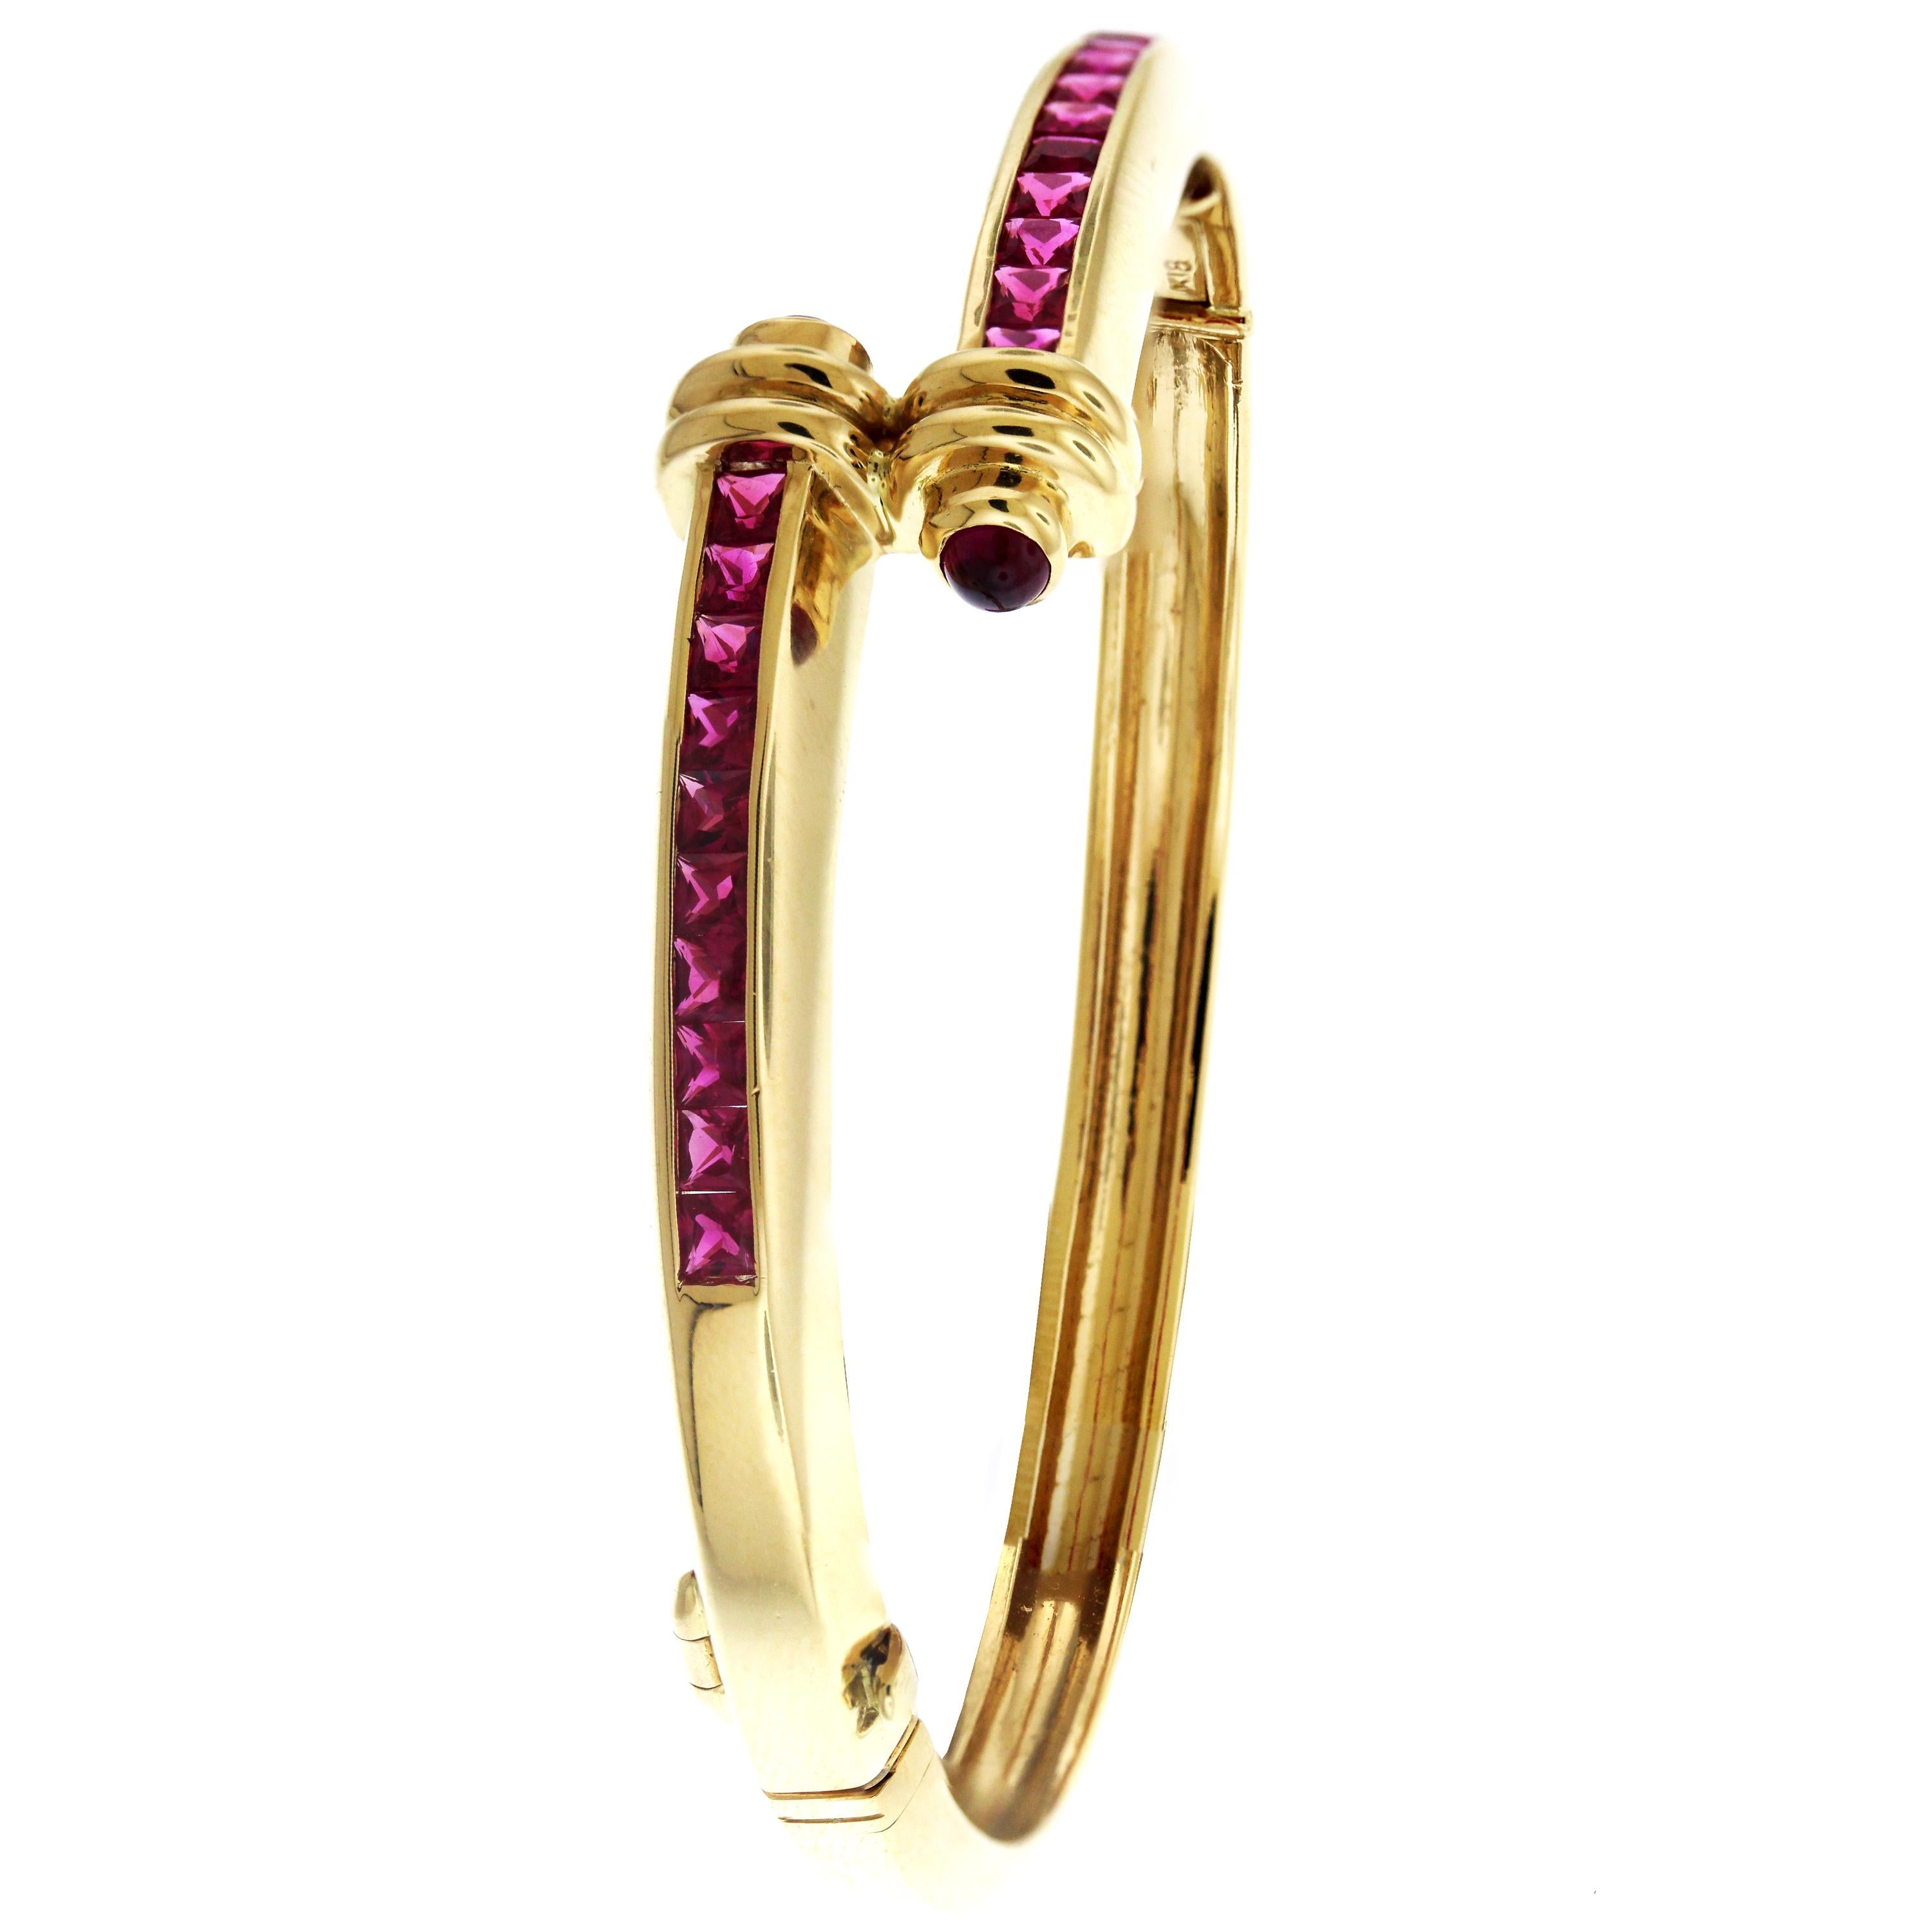 18K Yellow Gold Crossover Bracelet with Princess Cut Rubies

2.5 carat Rubies

Bracelet measures 7 inches in length, 0.25 inch width.

Made in USA